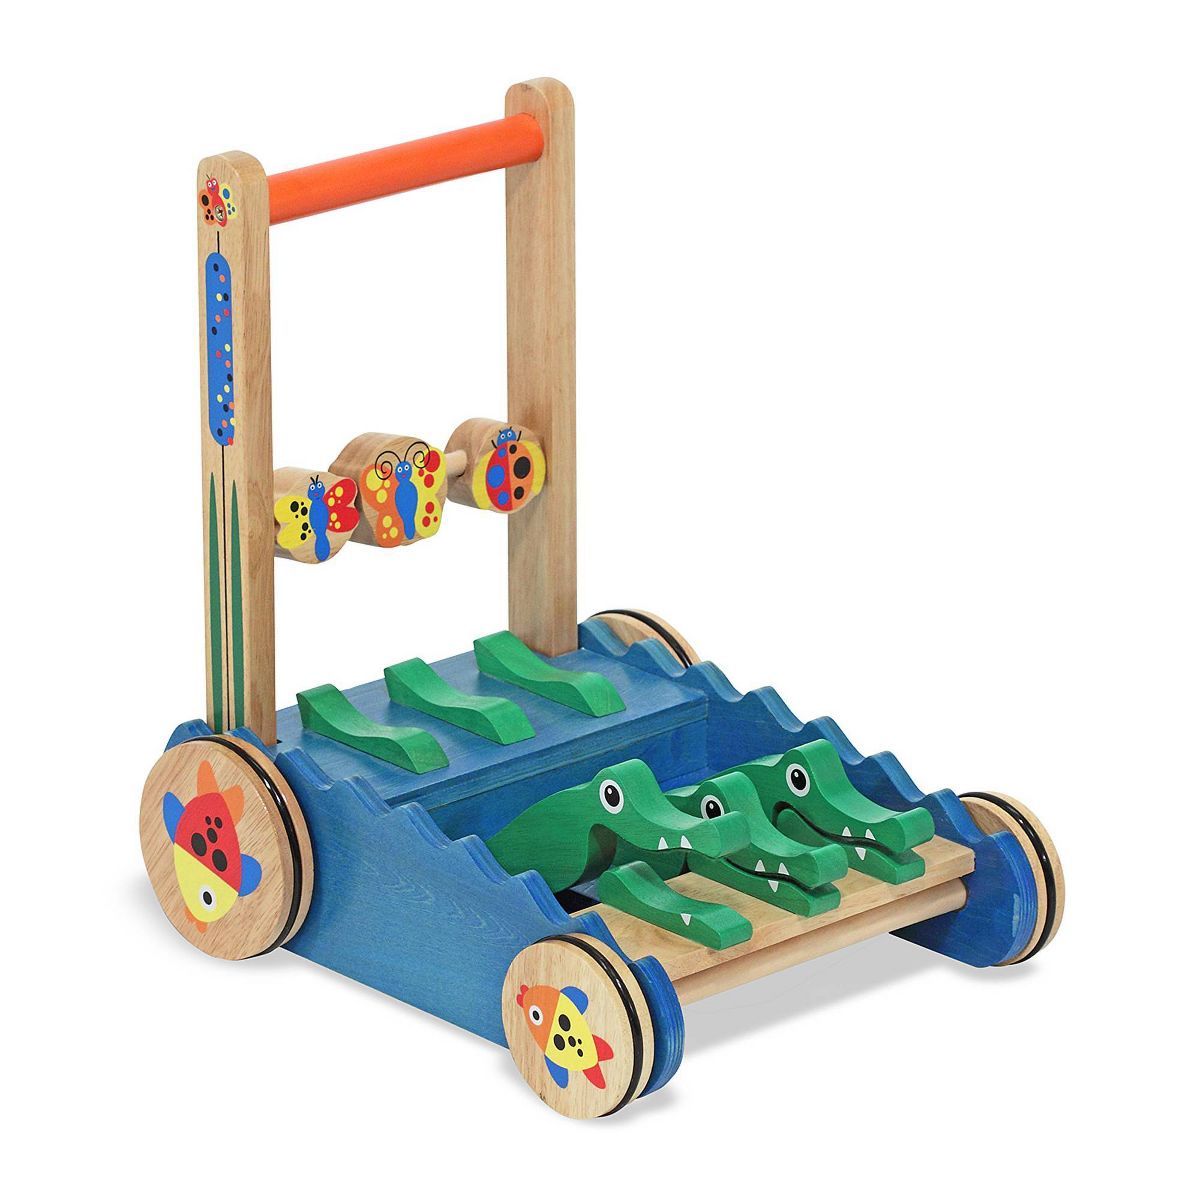 Melissa & Doug Deluxe Chomp and Clack Alligator Wooden Push Toy and Activity Walker | Target